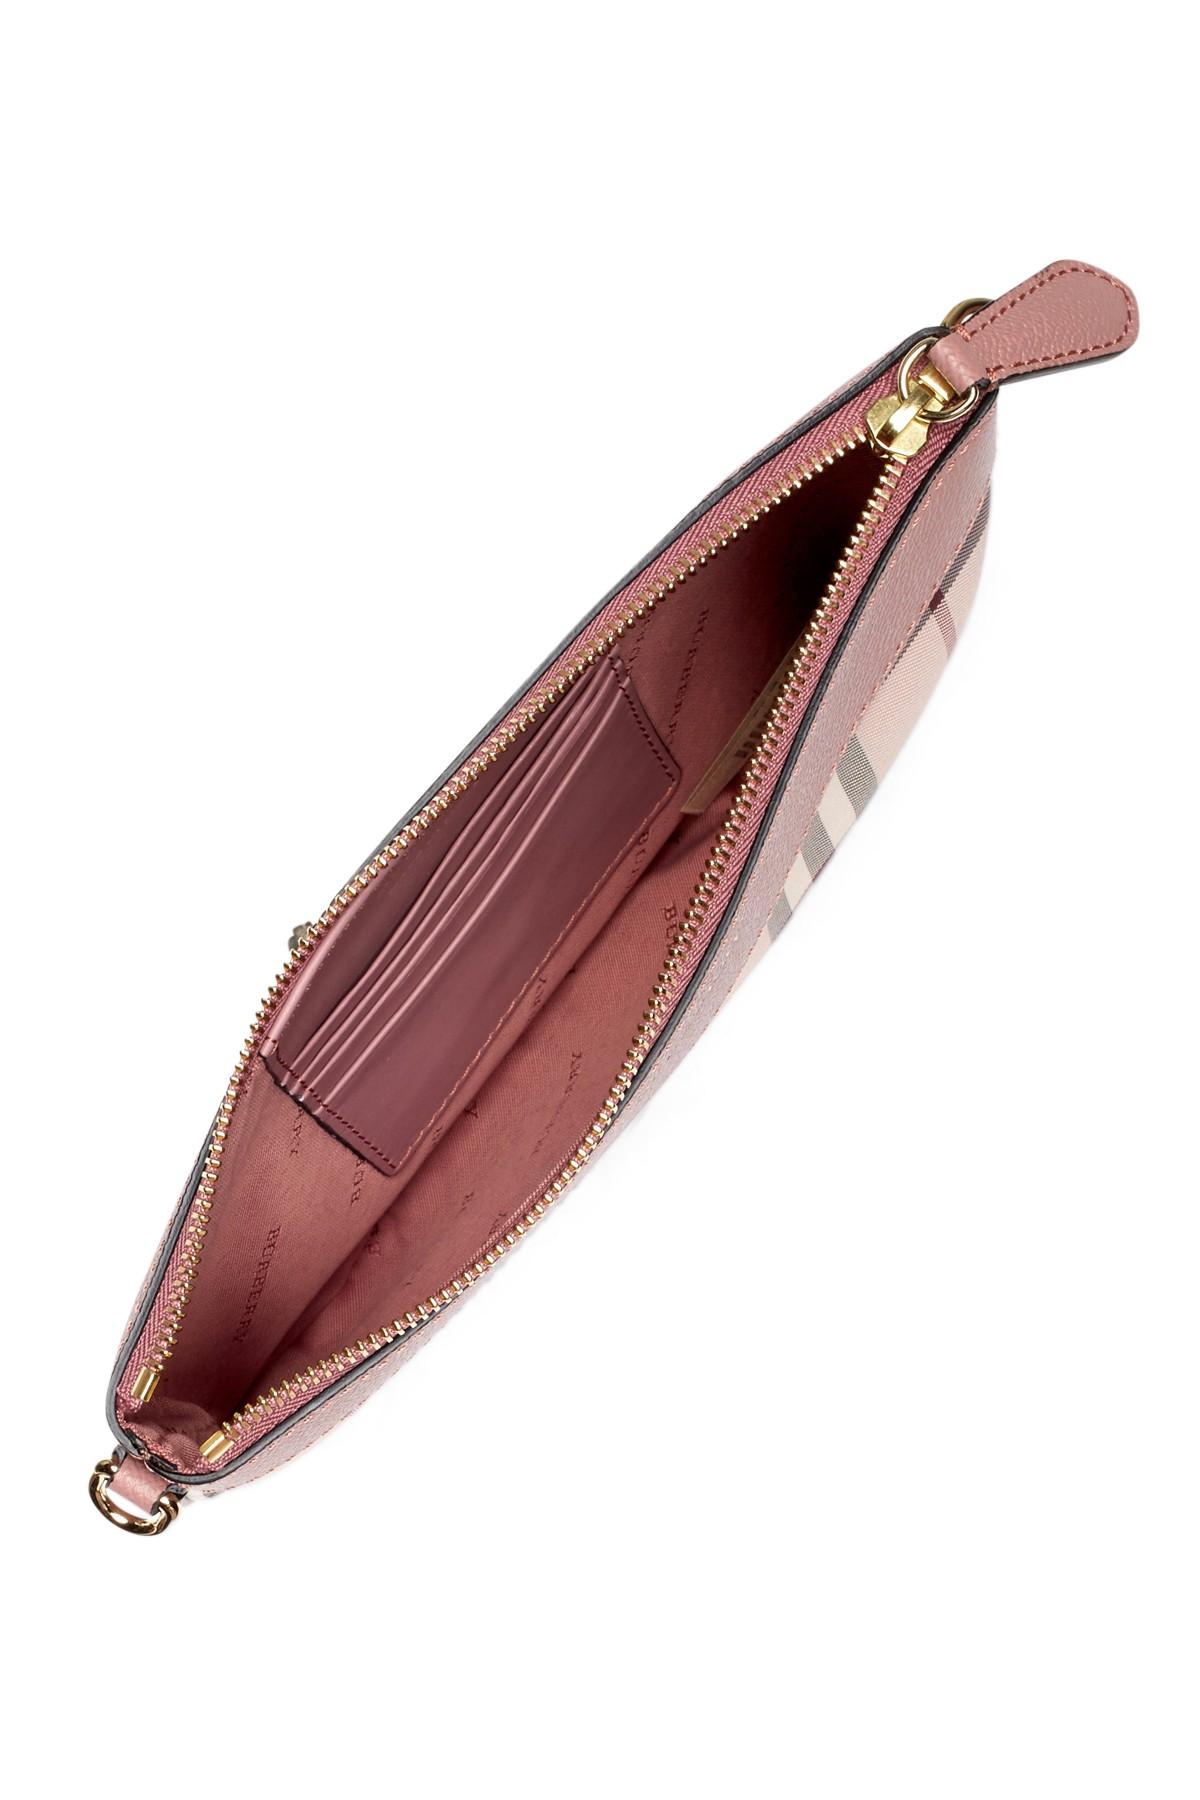 Burberry Synthetic Crossbody Bag in Pink - Lyst